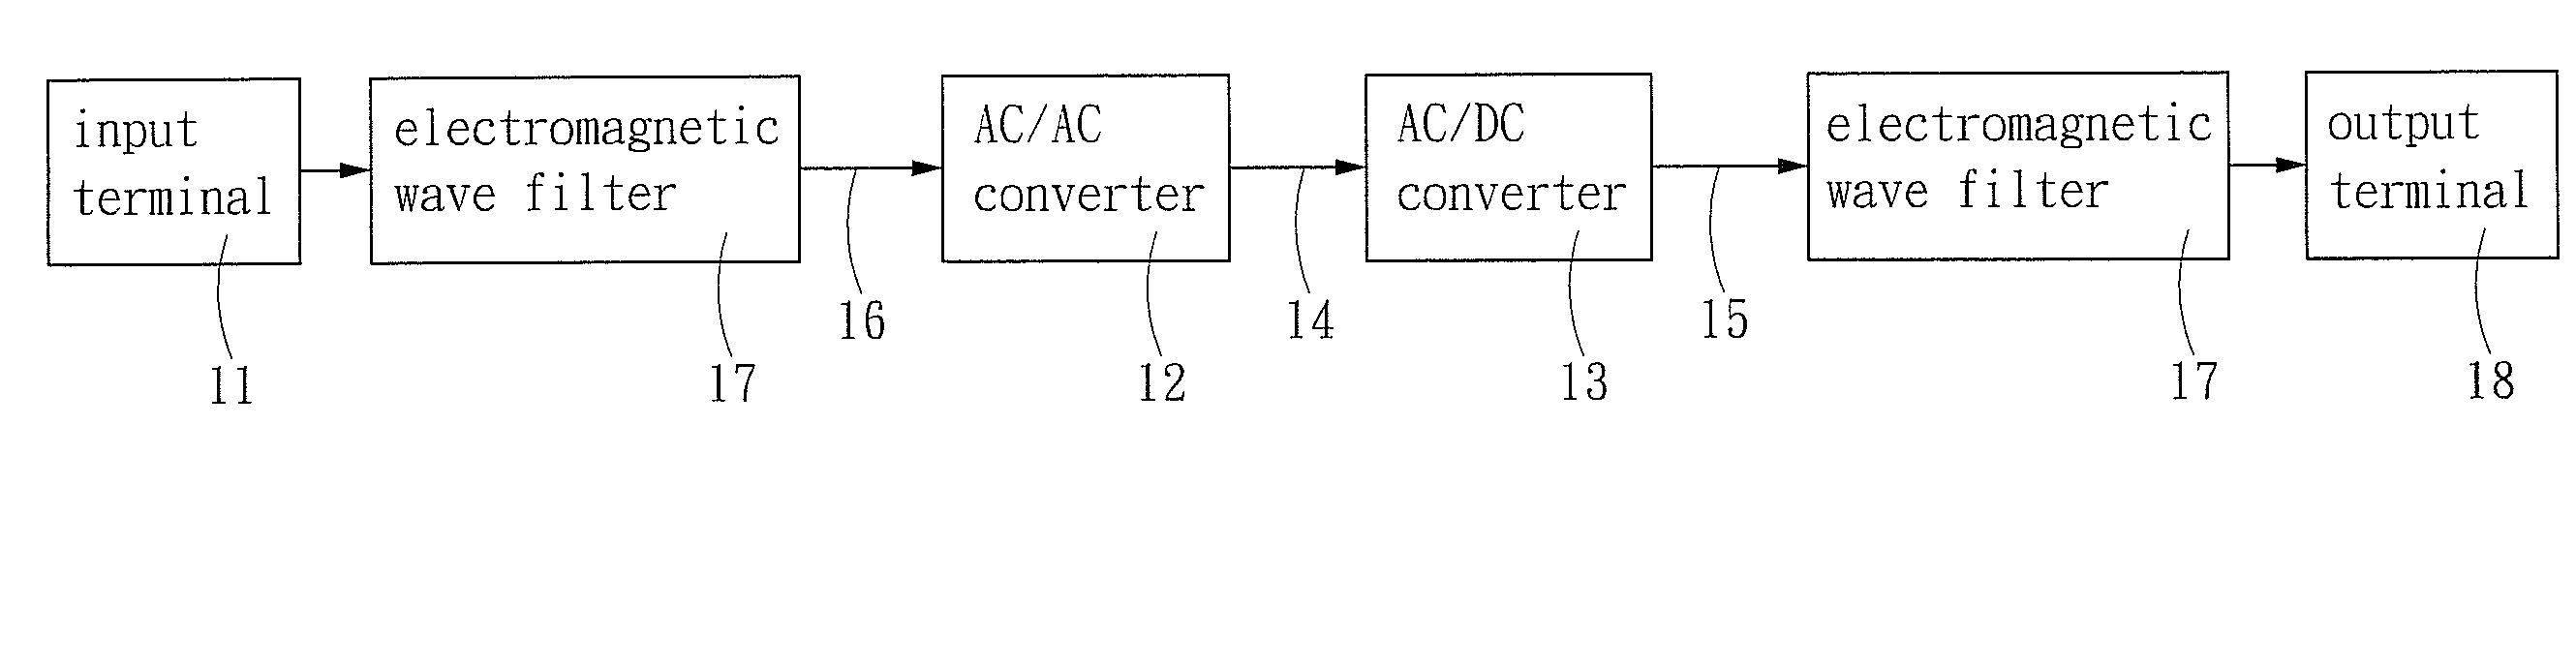 Adapter connection structure